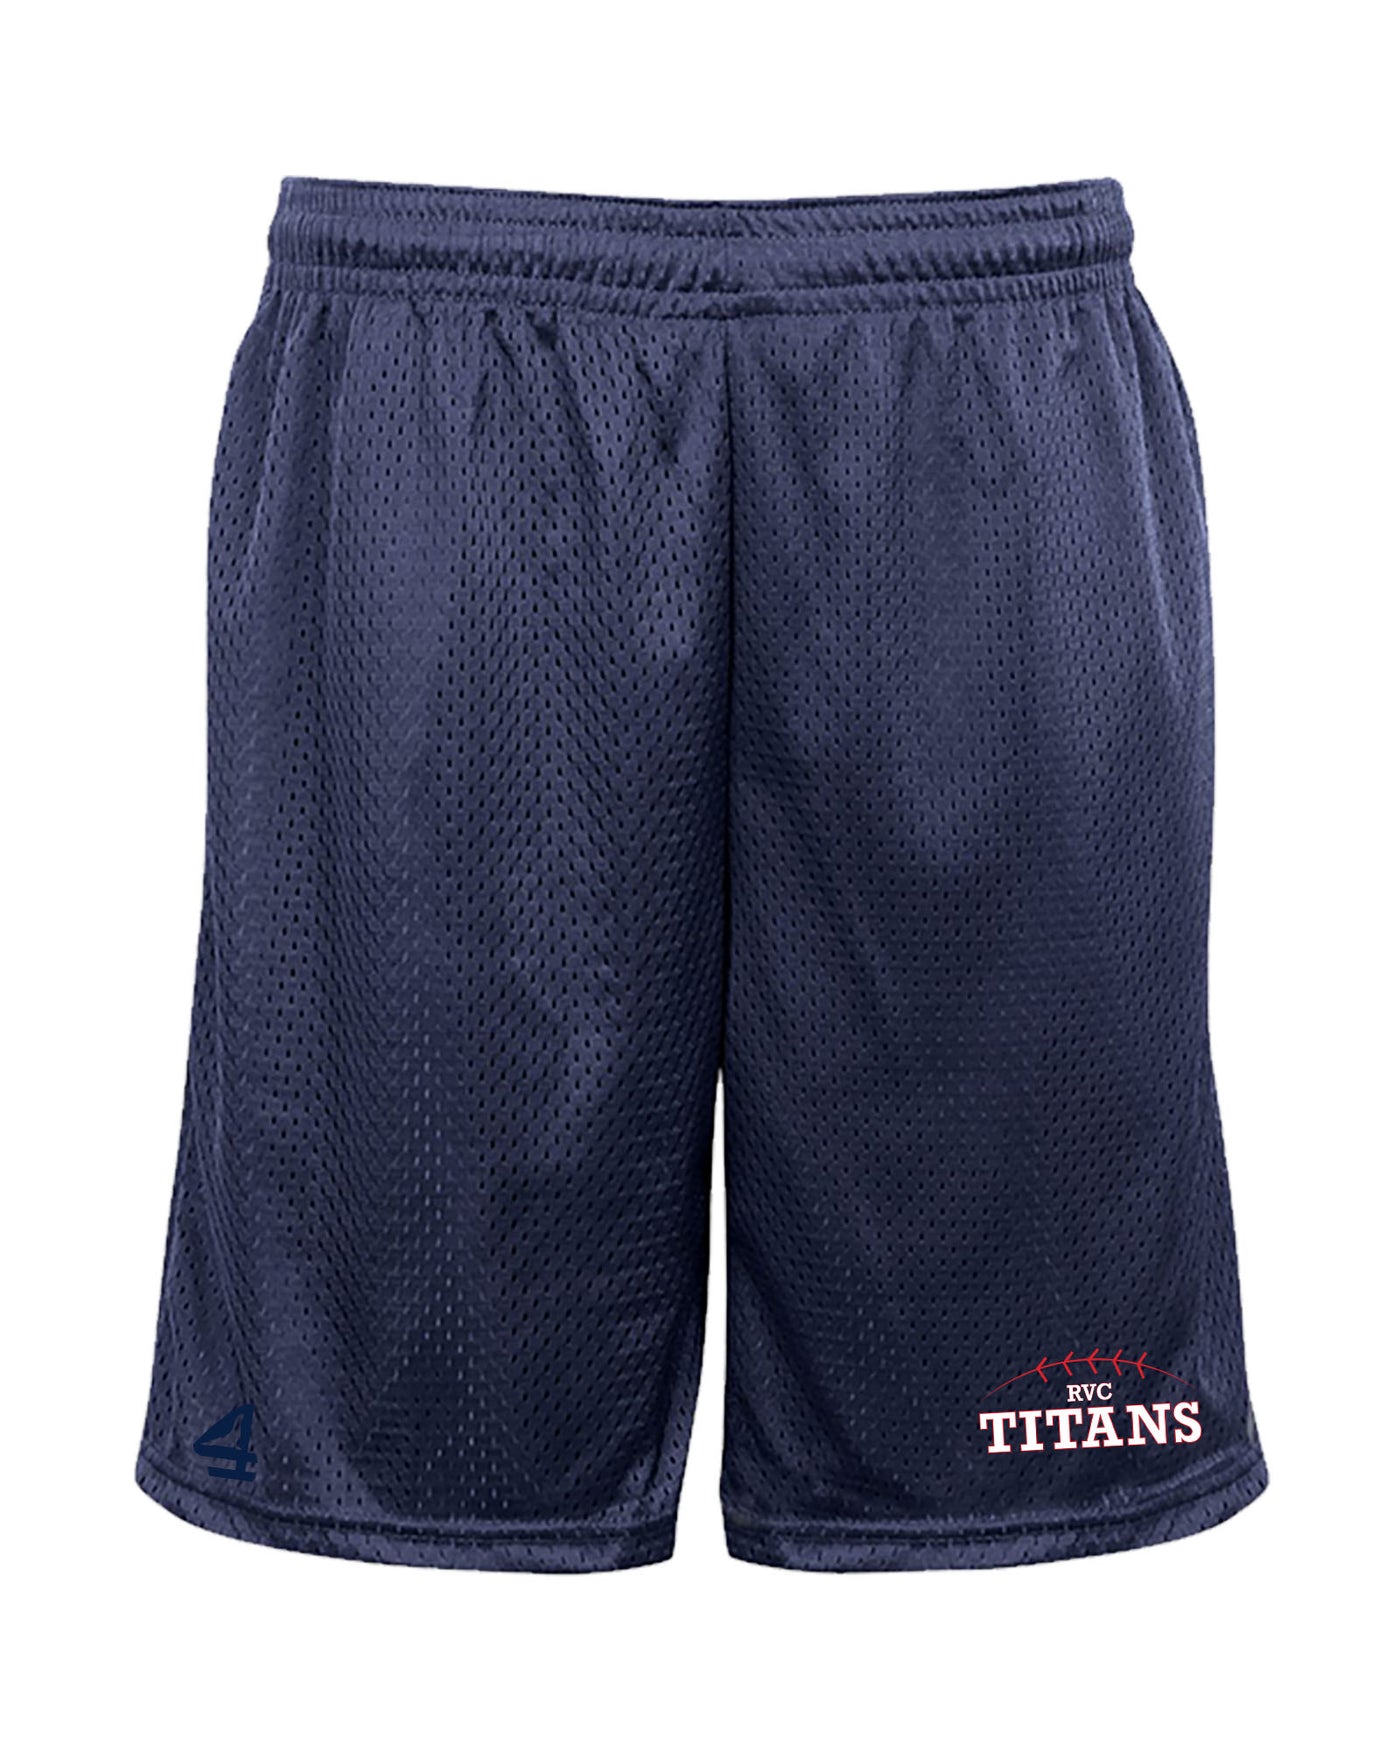 Titans Mesh Game Day Shorts With Pockets